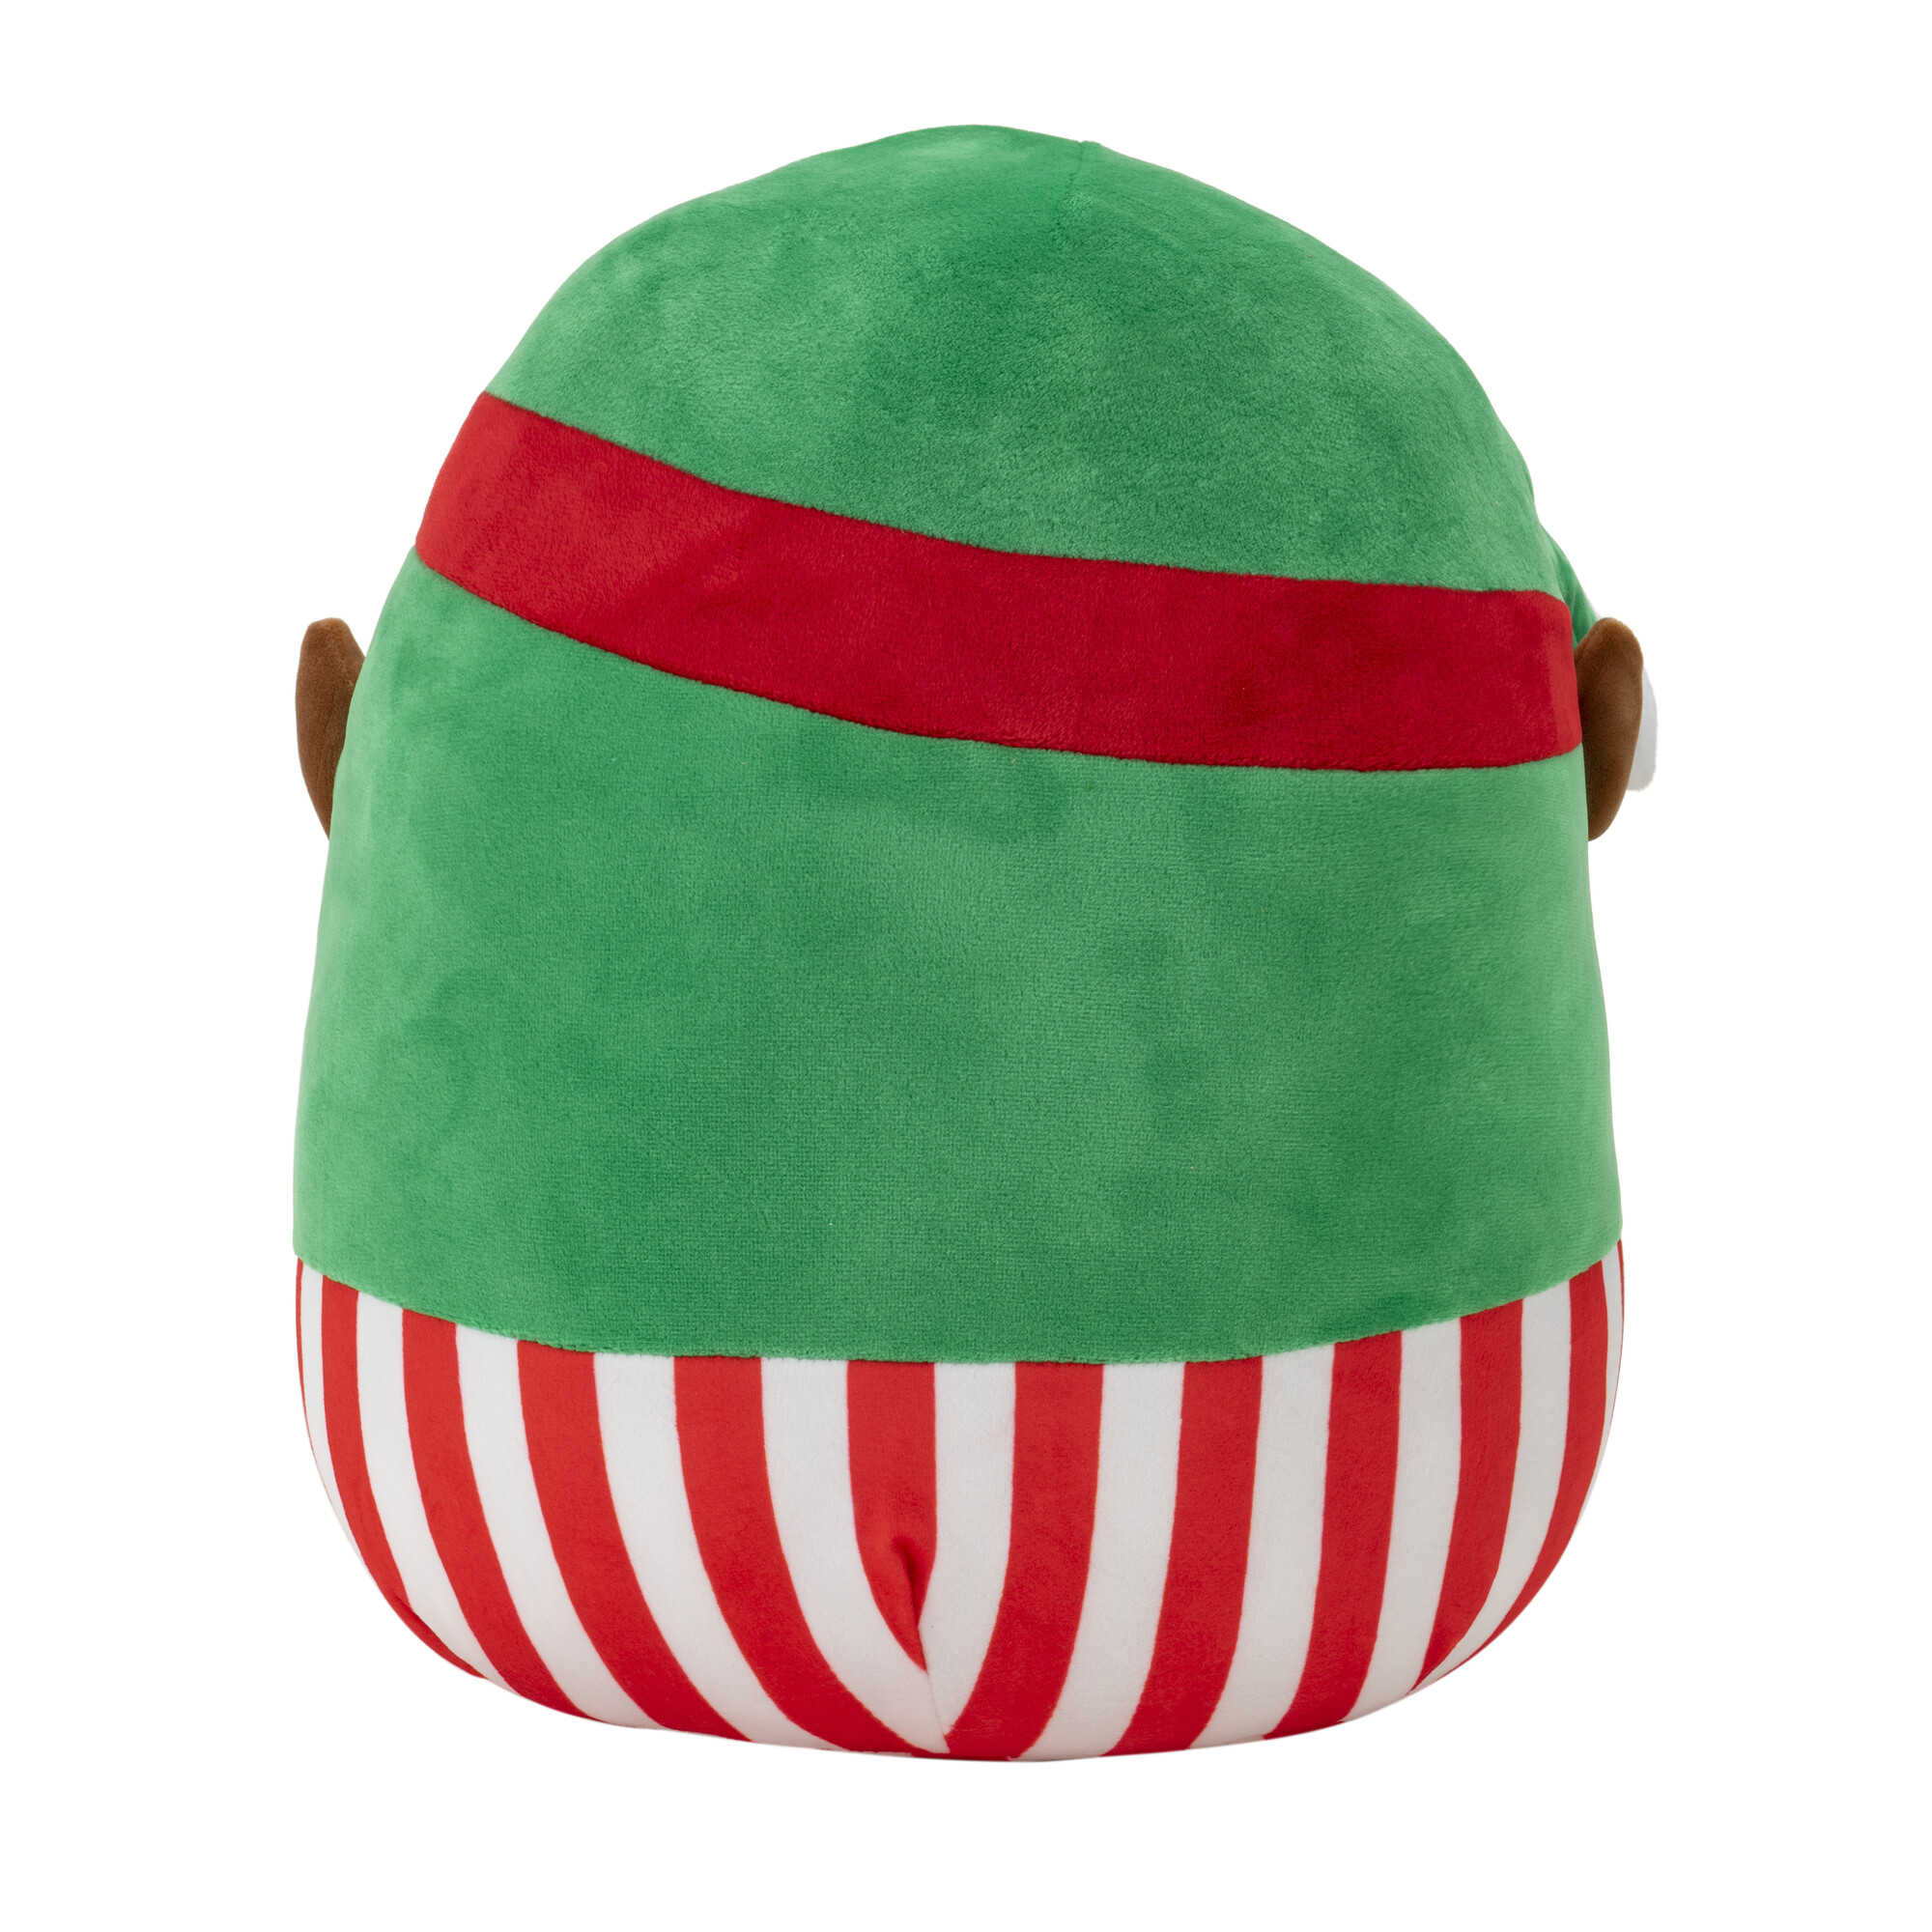 Squishmallows 12 inch Ezrah the Red and Green Elf Boy - Child's Ultra Soft Stuffed Plush Toy - image 3 of 7